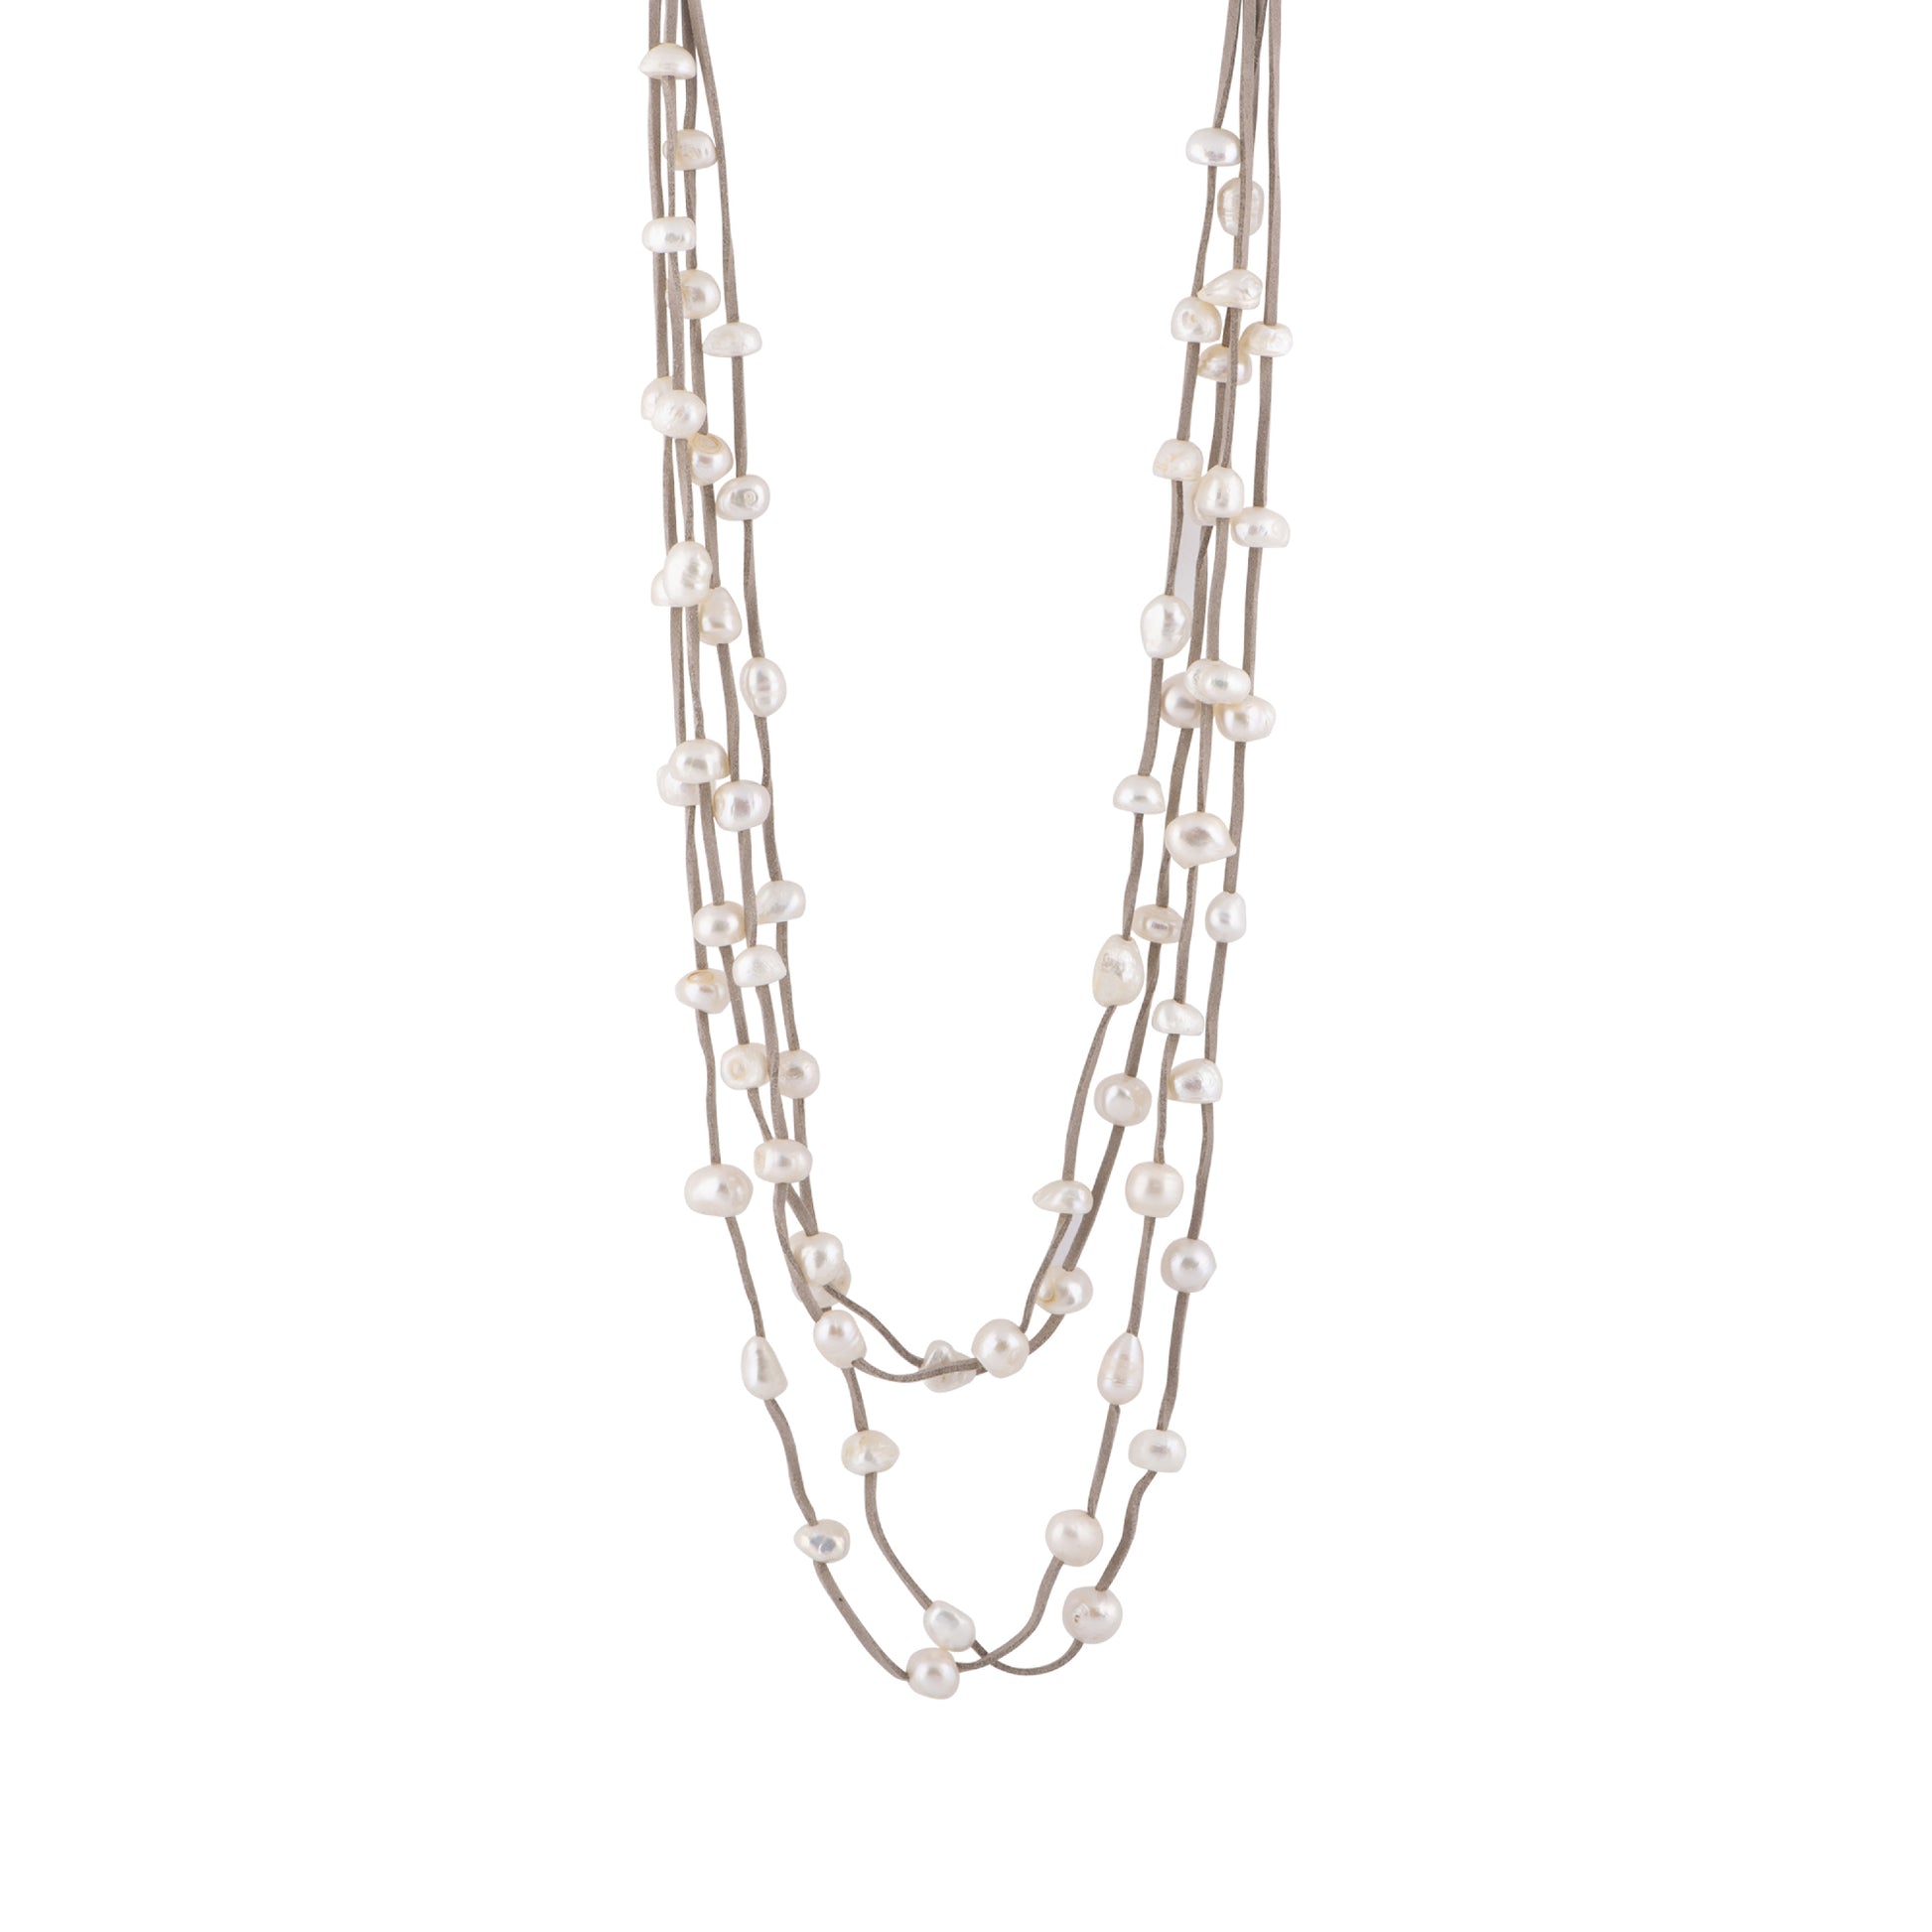 Julie - Multi strand suede necklace with pearls (Grey suede, white pearls)